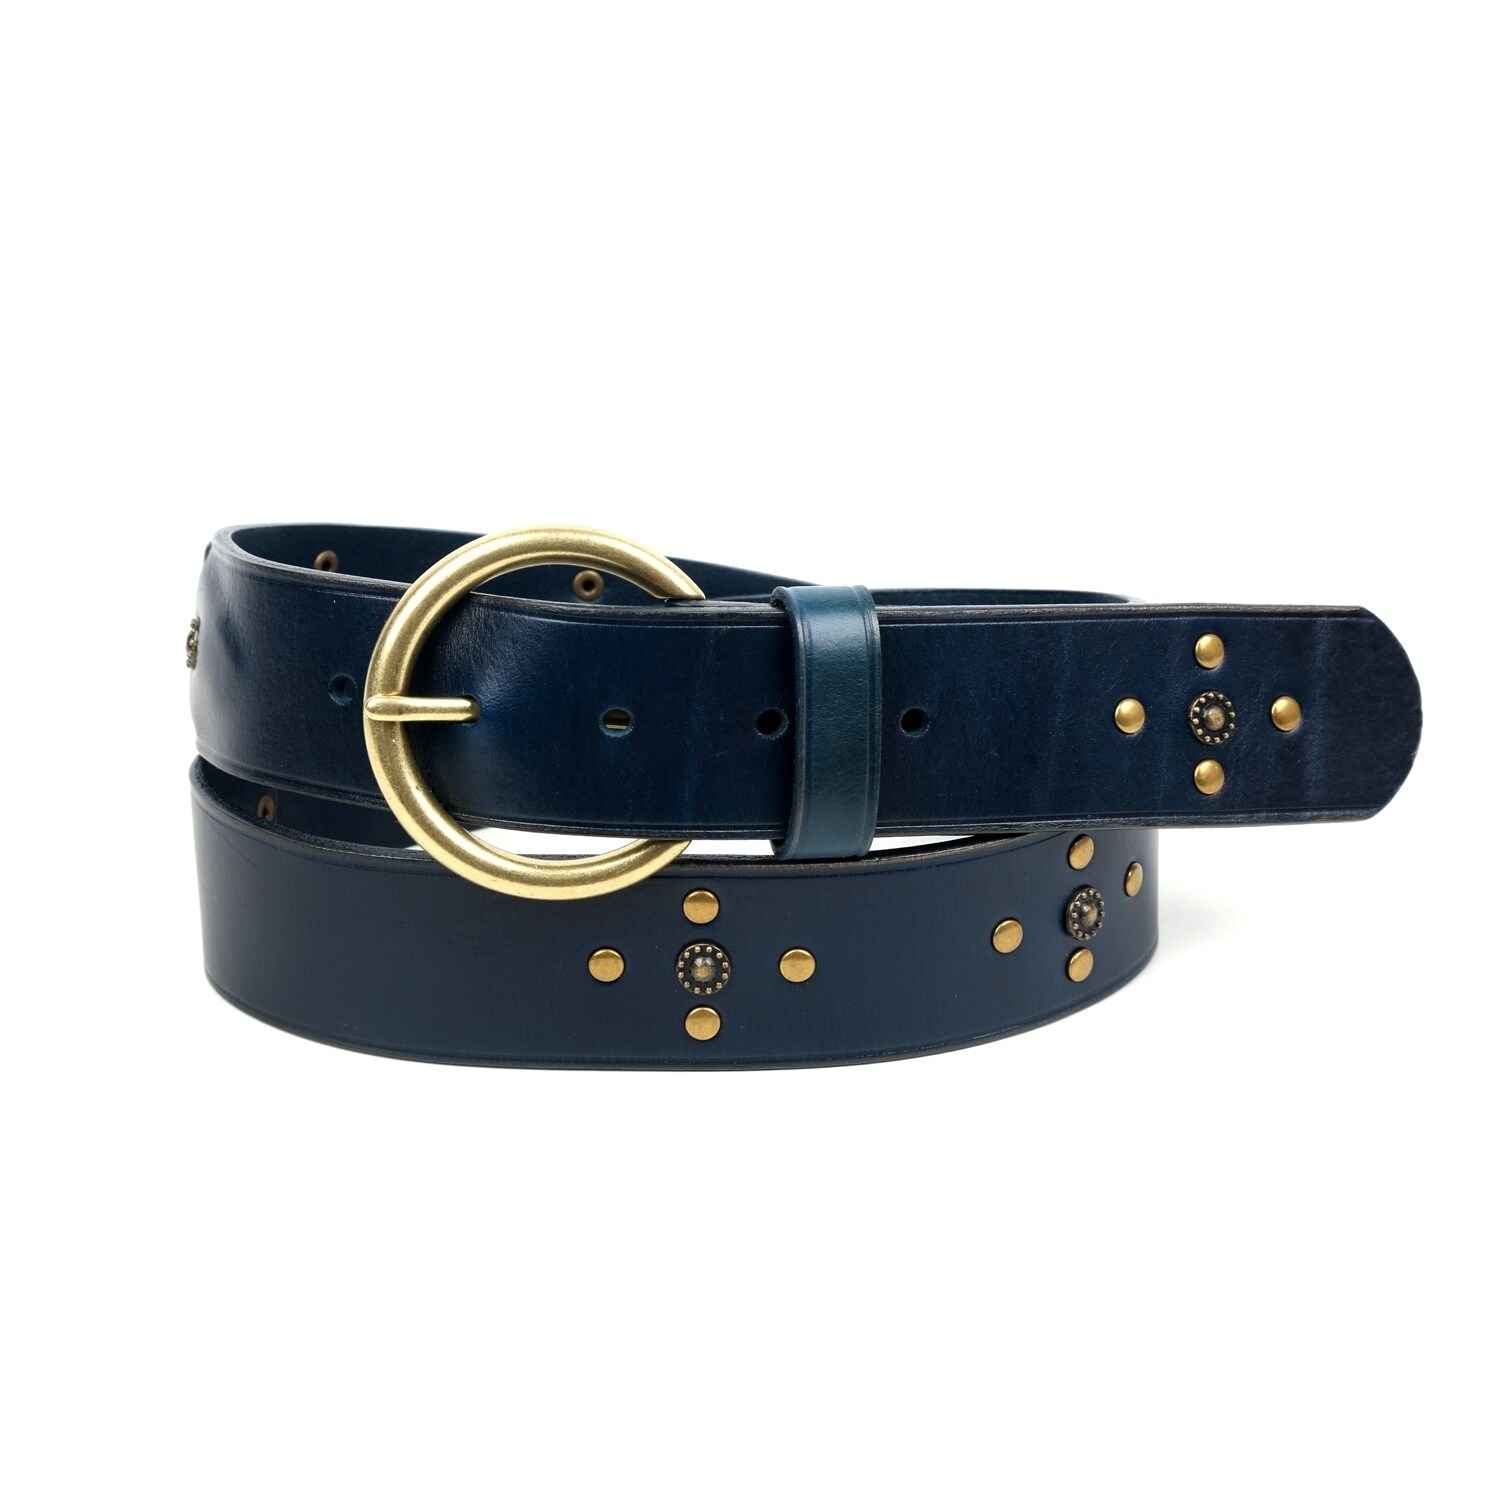 Old Trend Gia Leather Belt - On Sale - Overstock - 20359960